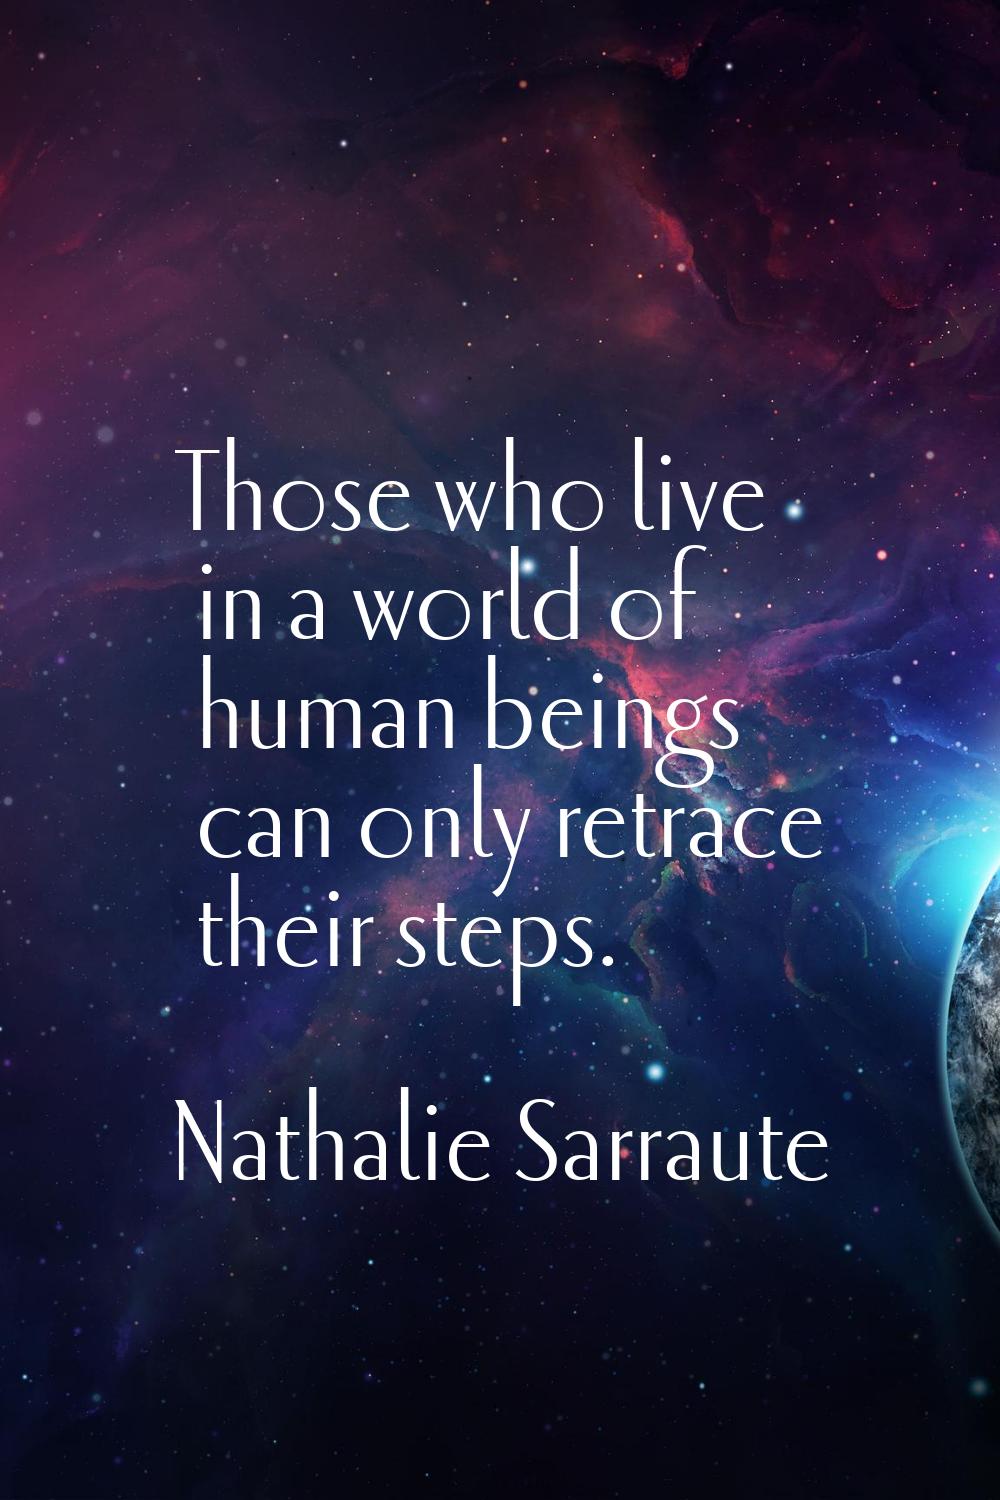 Those who live in a world of human beings can only retrace their steps.